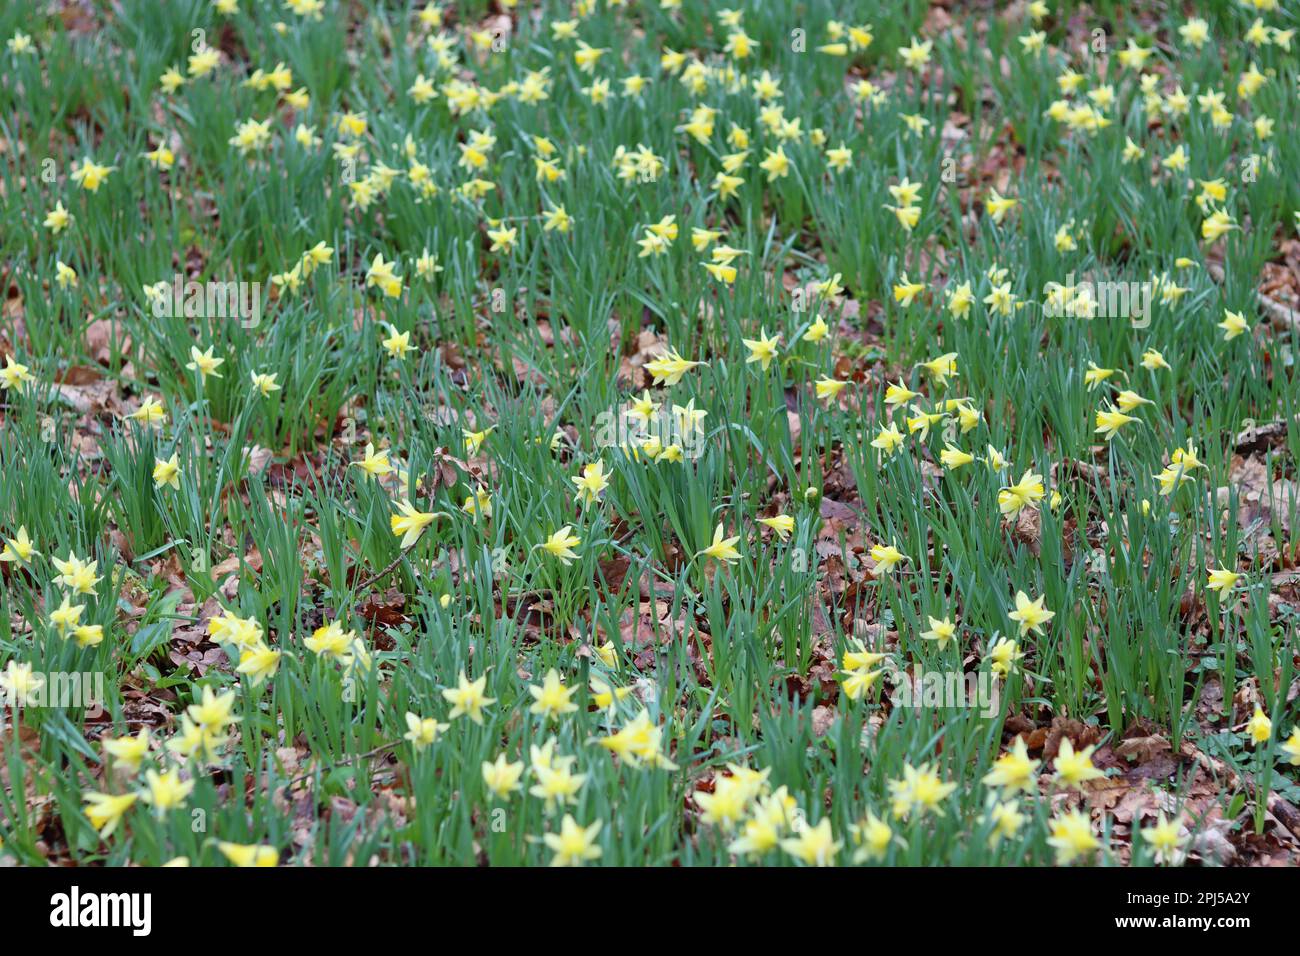 Masses of bright yellow and white wild daffodils in a woodland in spring Stock Photo